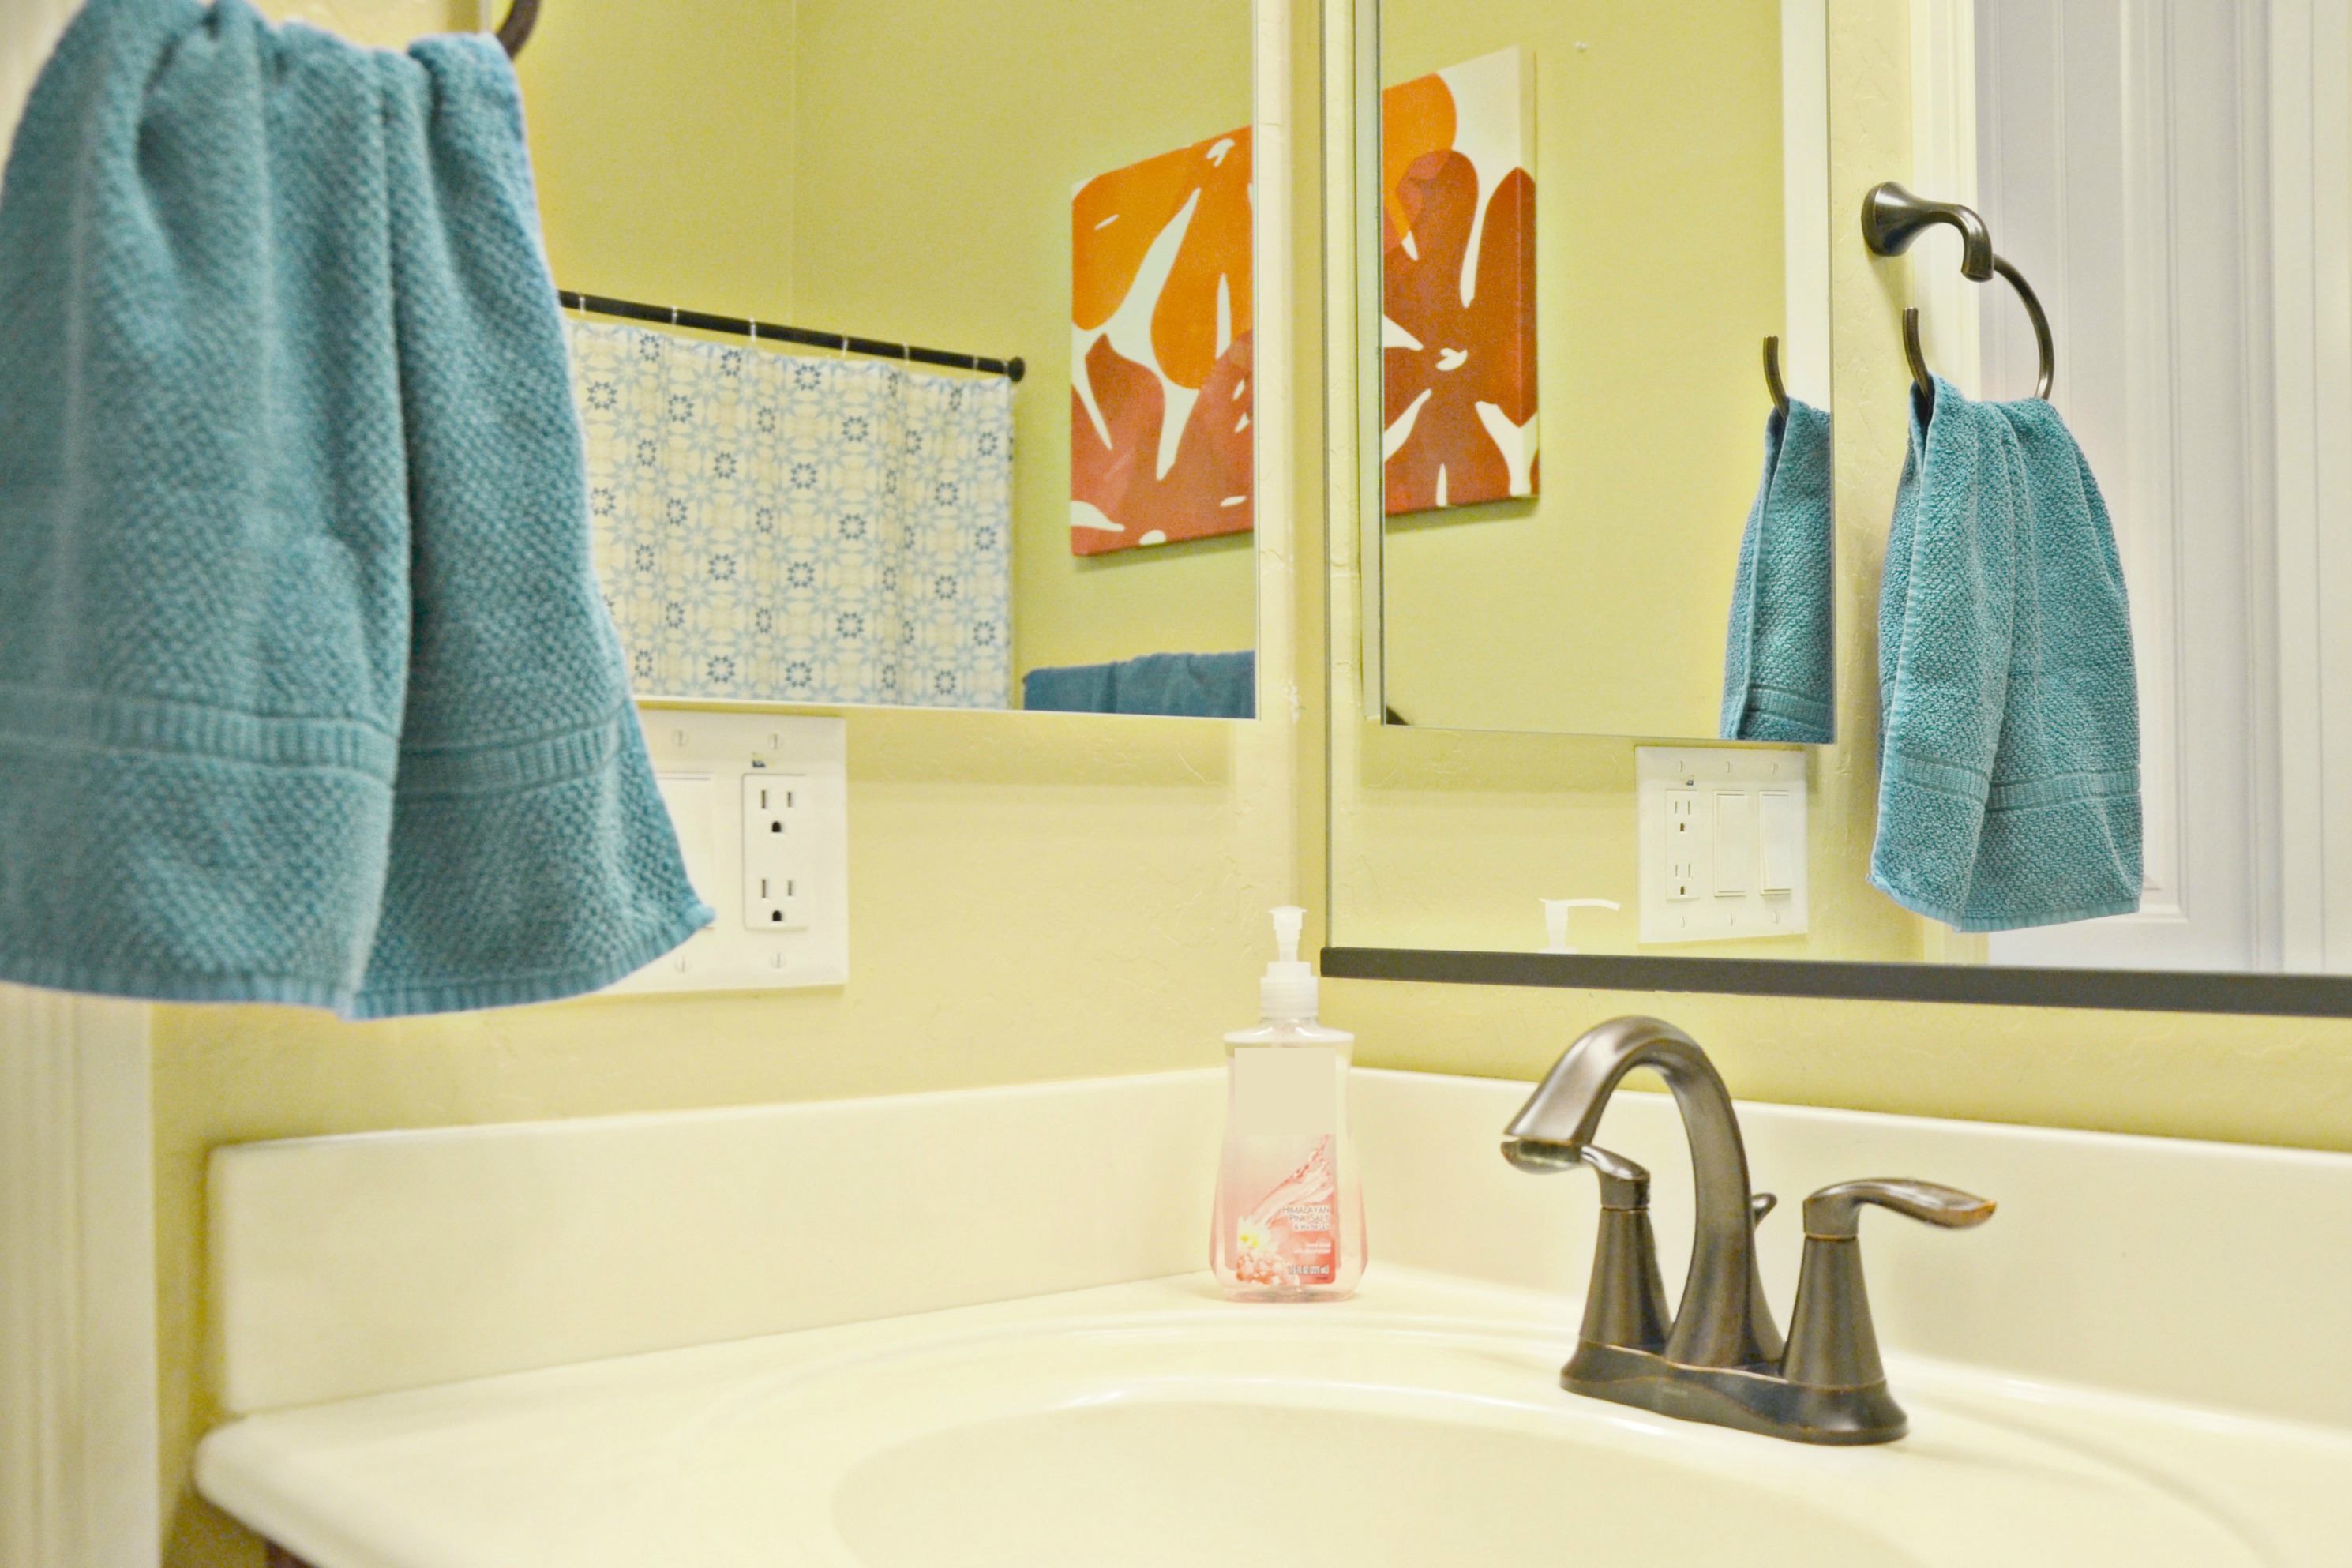 Tips for a quick guest friendly bathroom clean